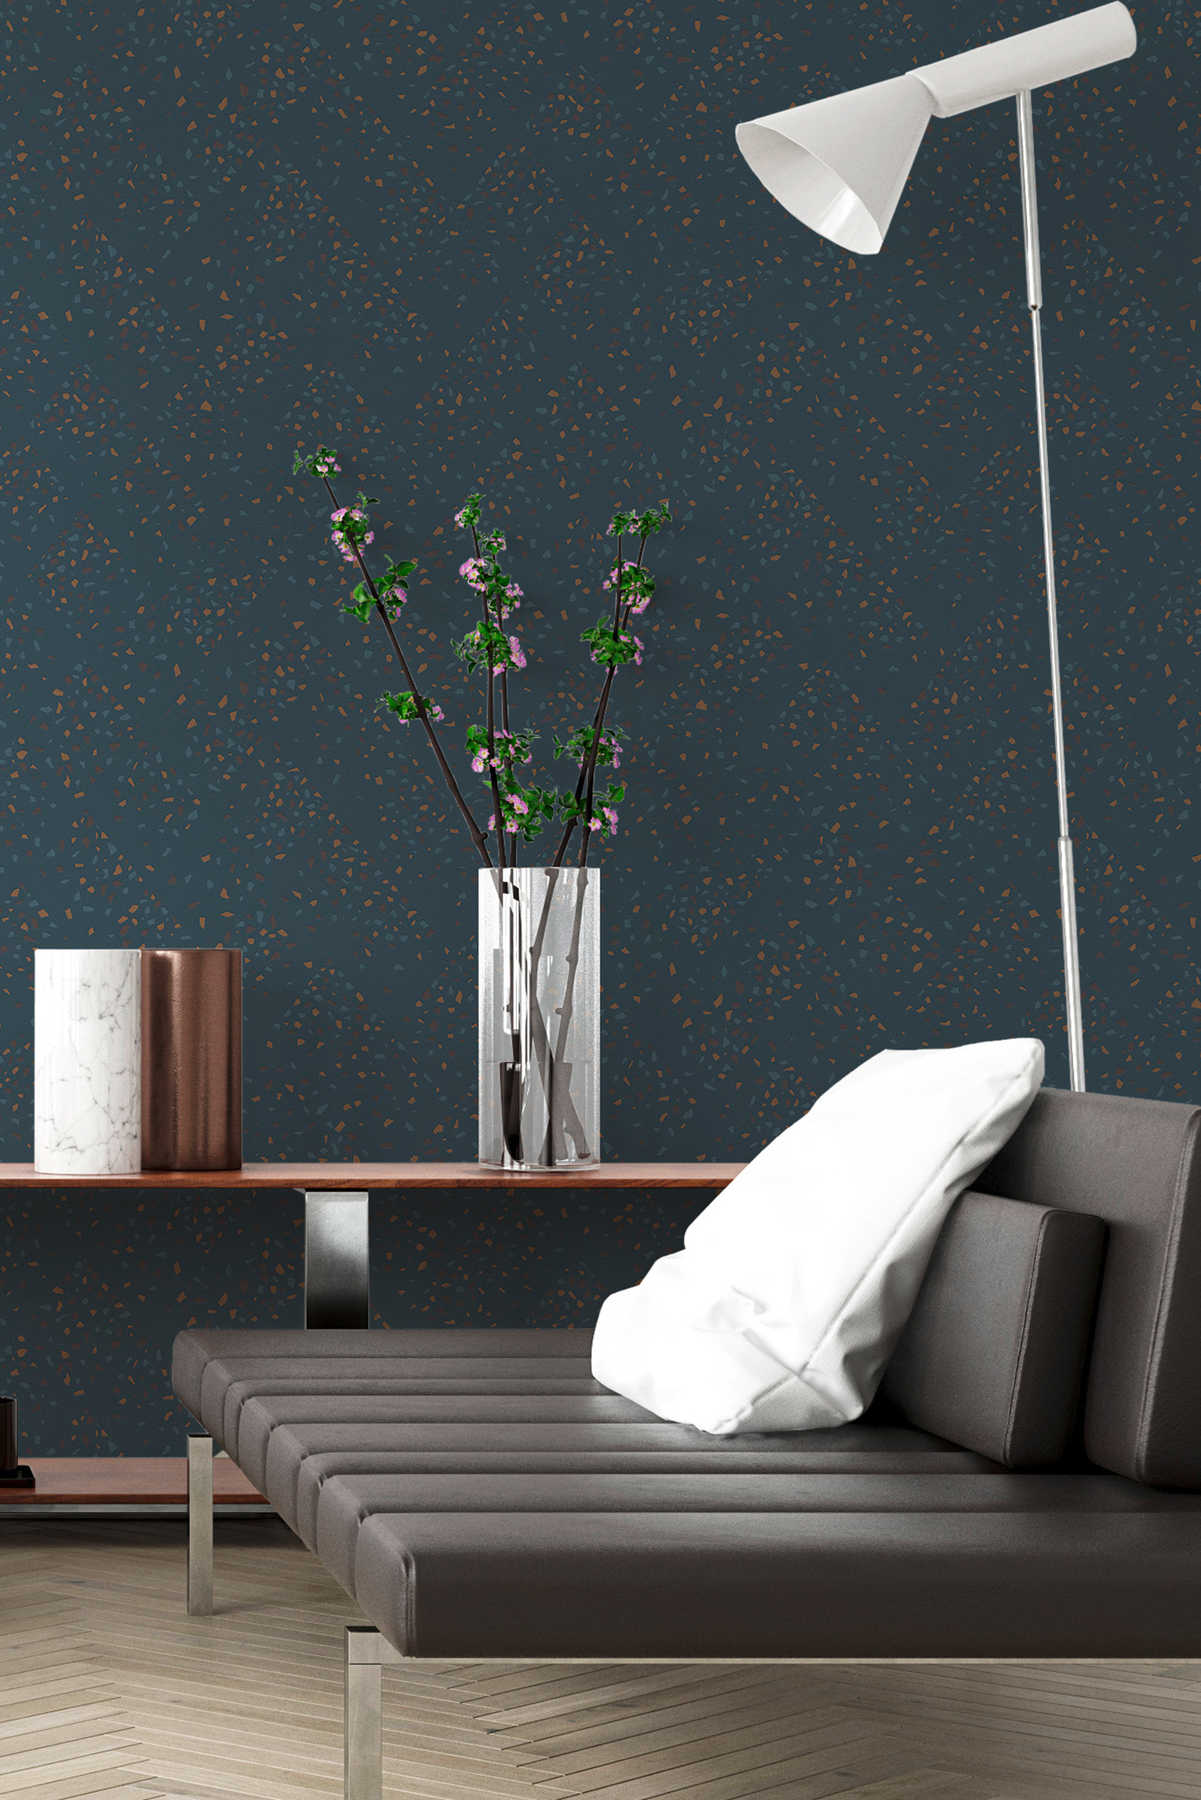             Non-woven wallpaper with terrazzo pattern - blue, green, brown
        